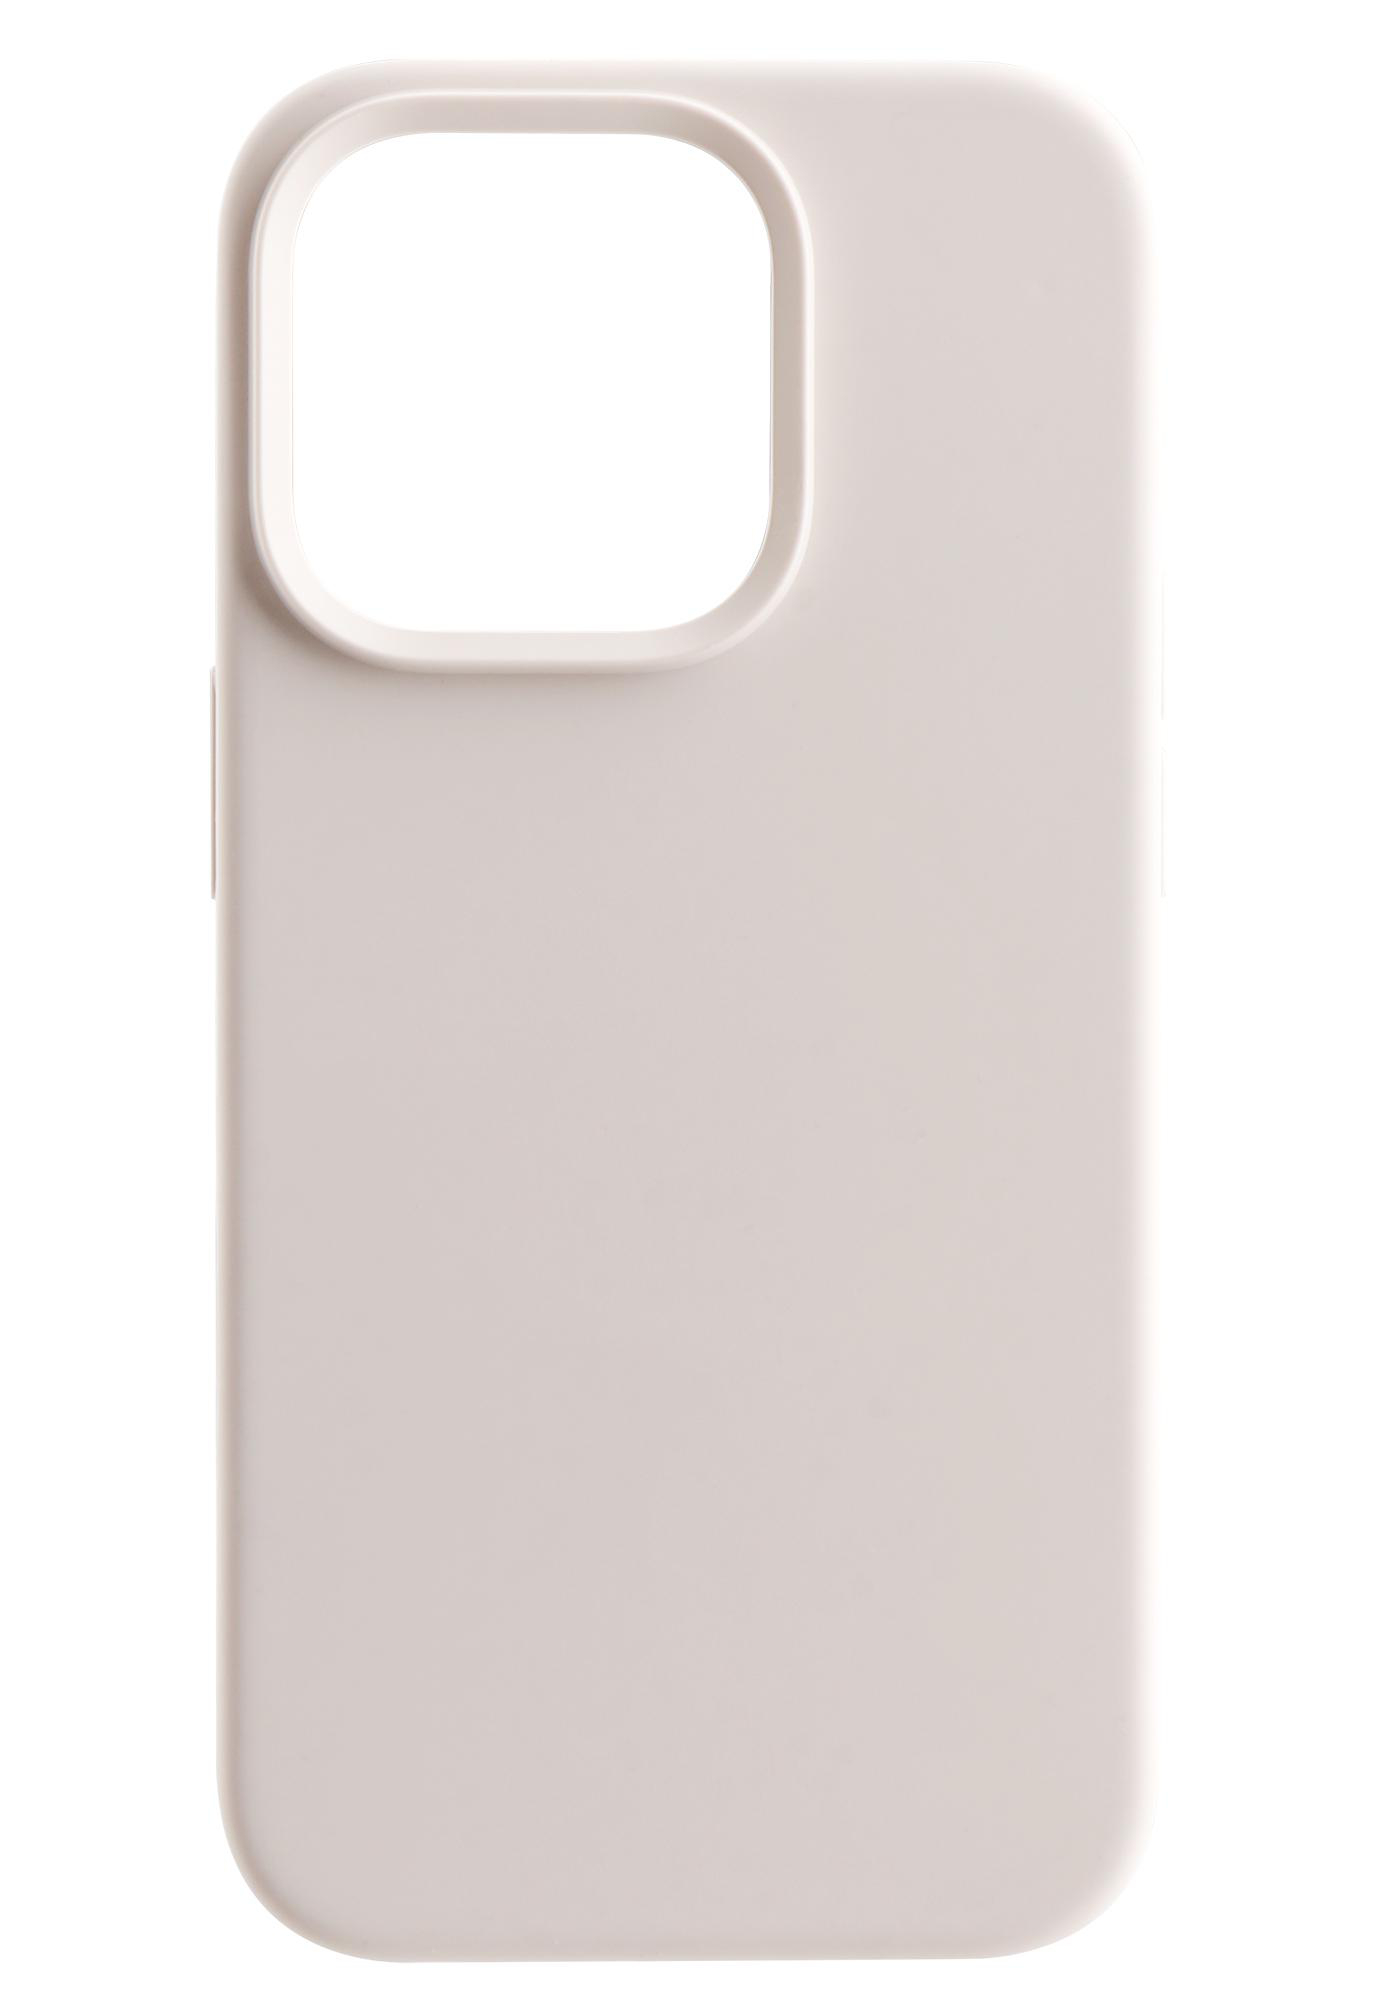 14 Pro iPhone Backcover, Hype, VIVANCO Max, Apple, Weiß Mag